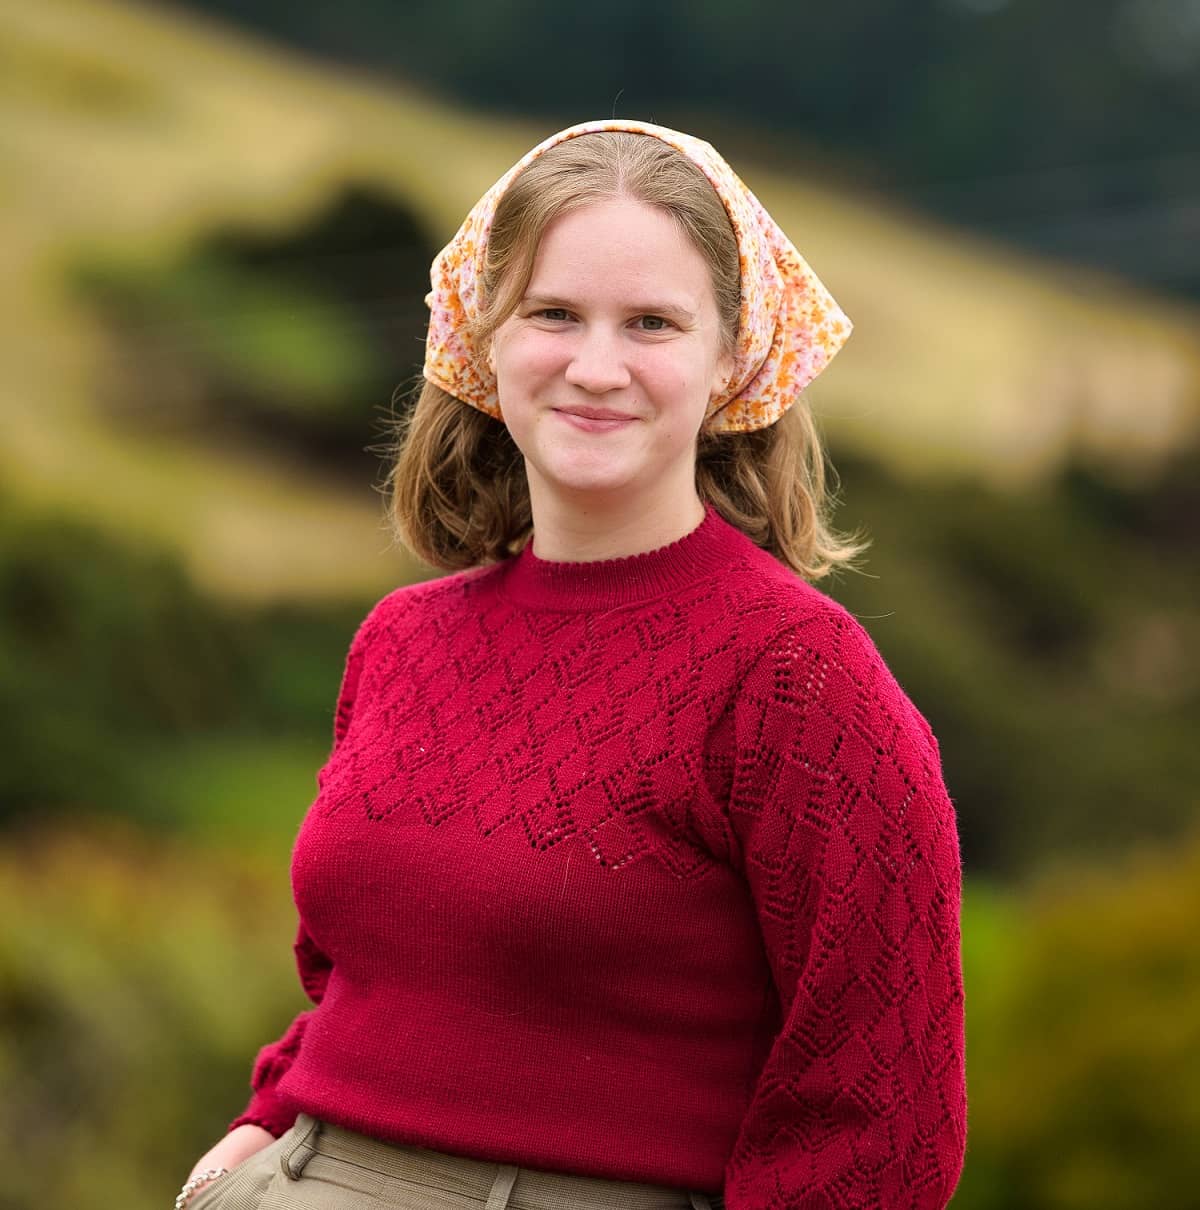 tui wearing a canteen bandanna and a red sweater. she is smiling at the camera